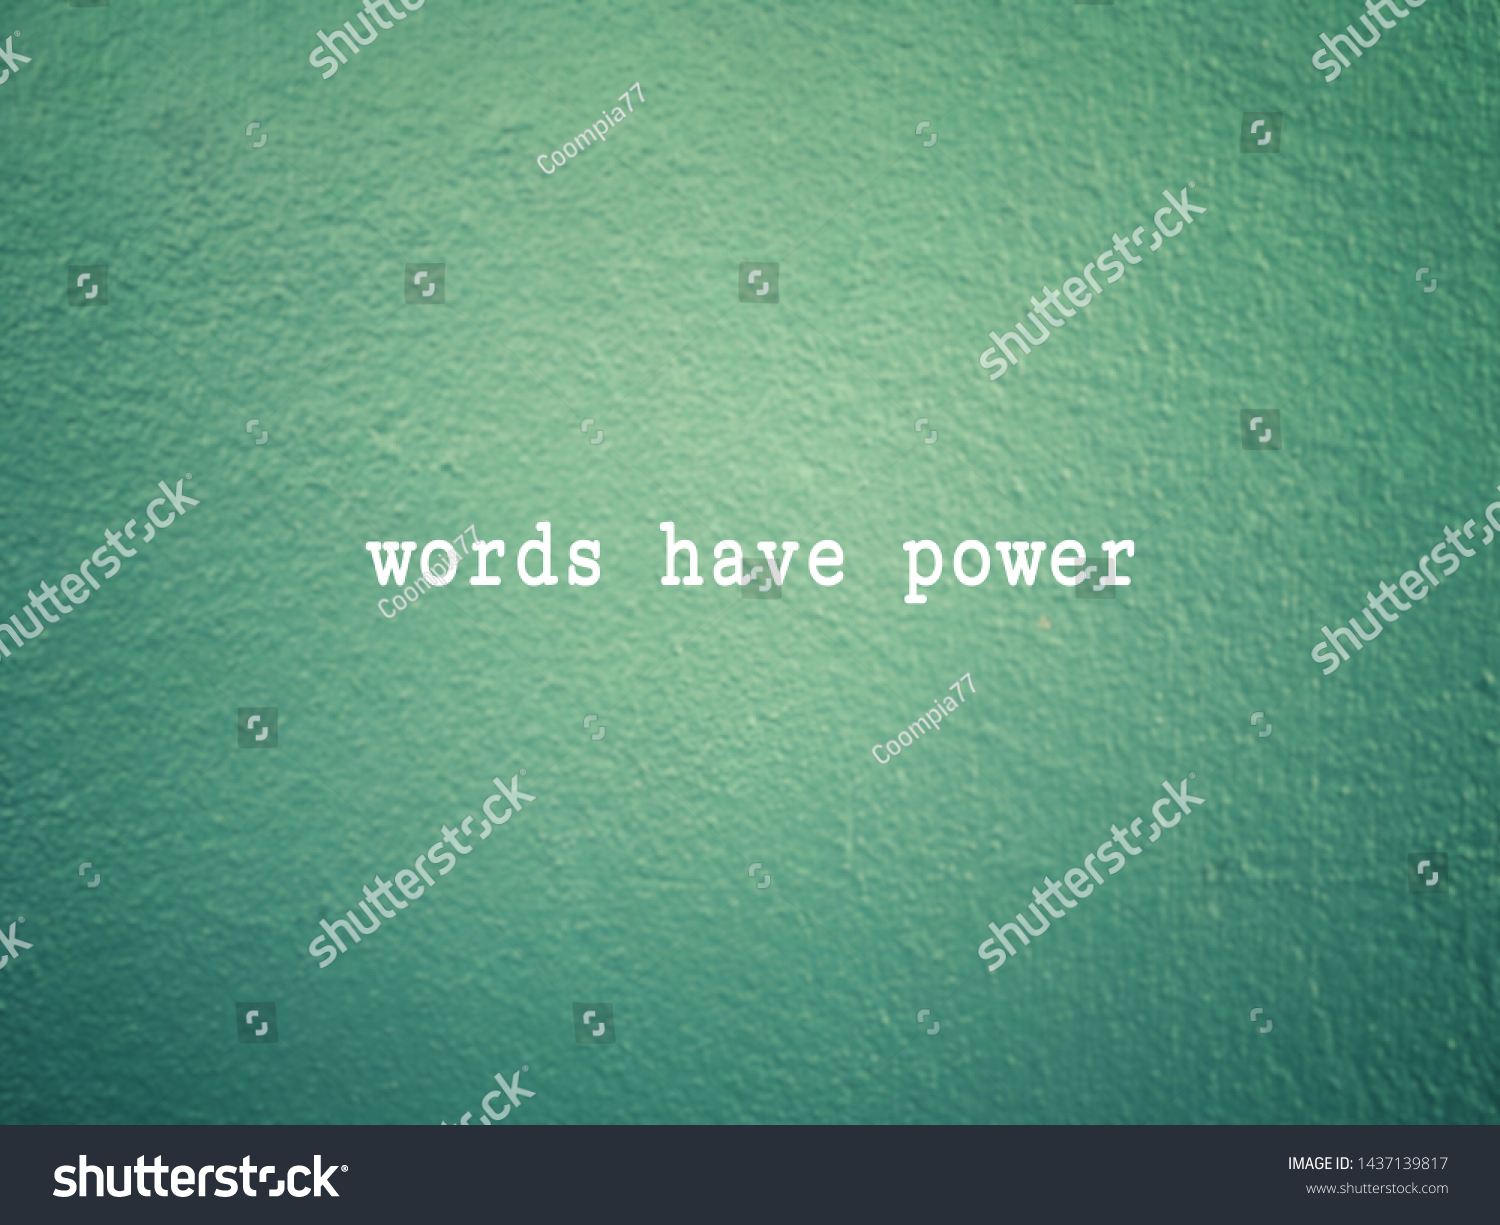 Motivational Inspirational Wording Words Have Power Stock Photo